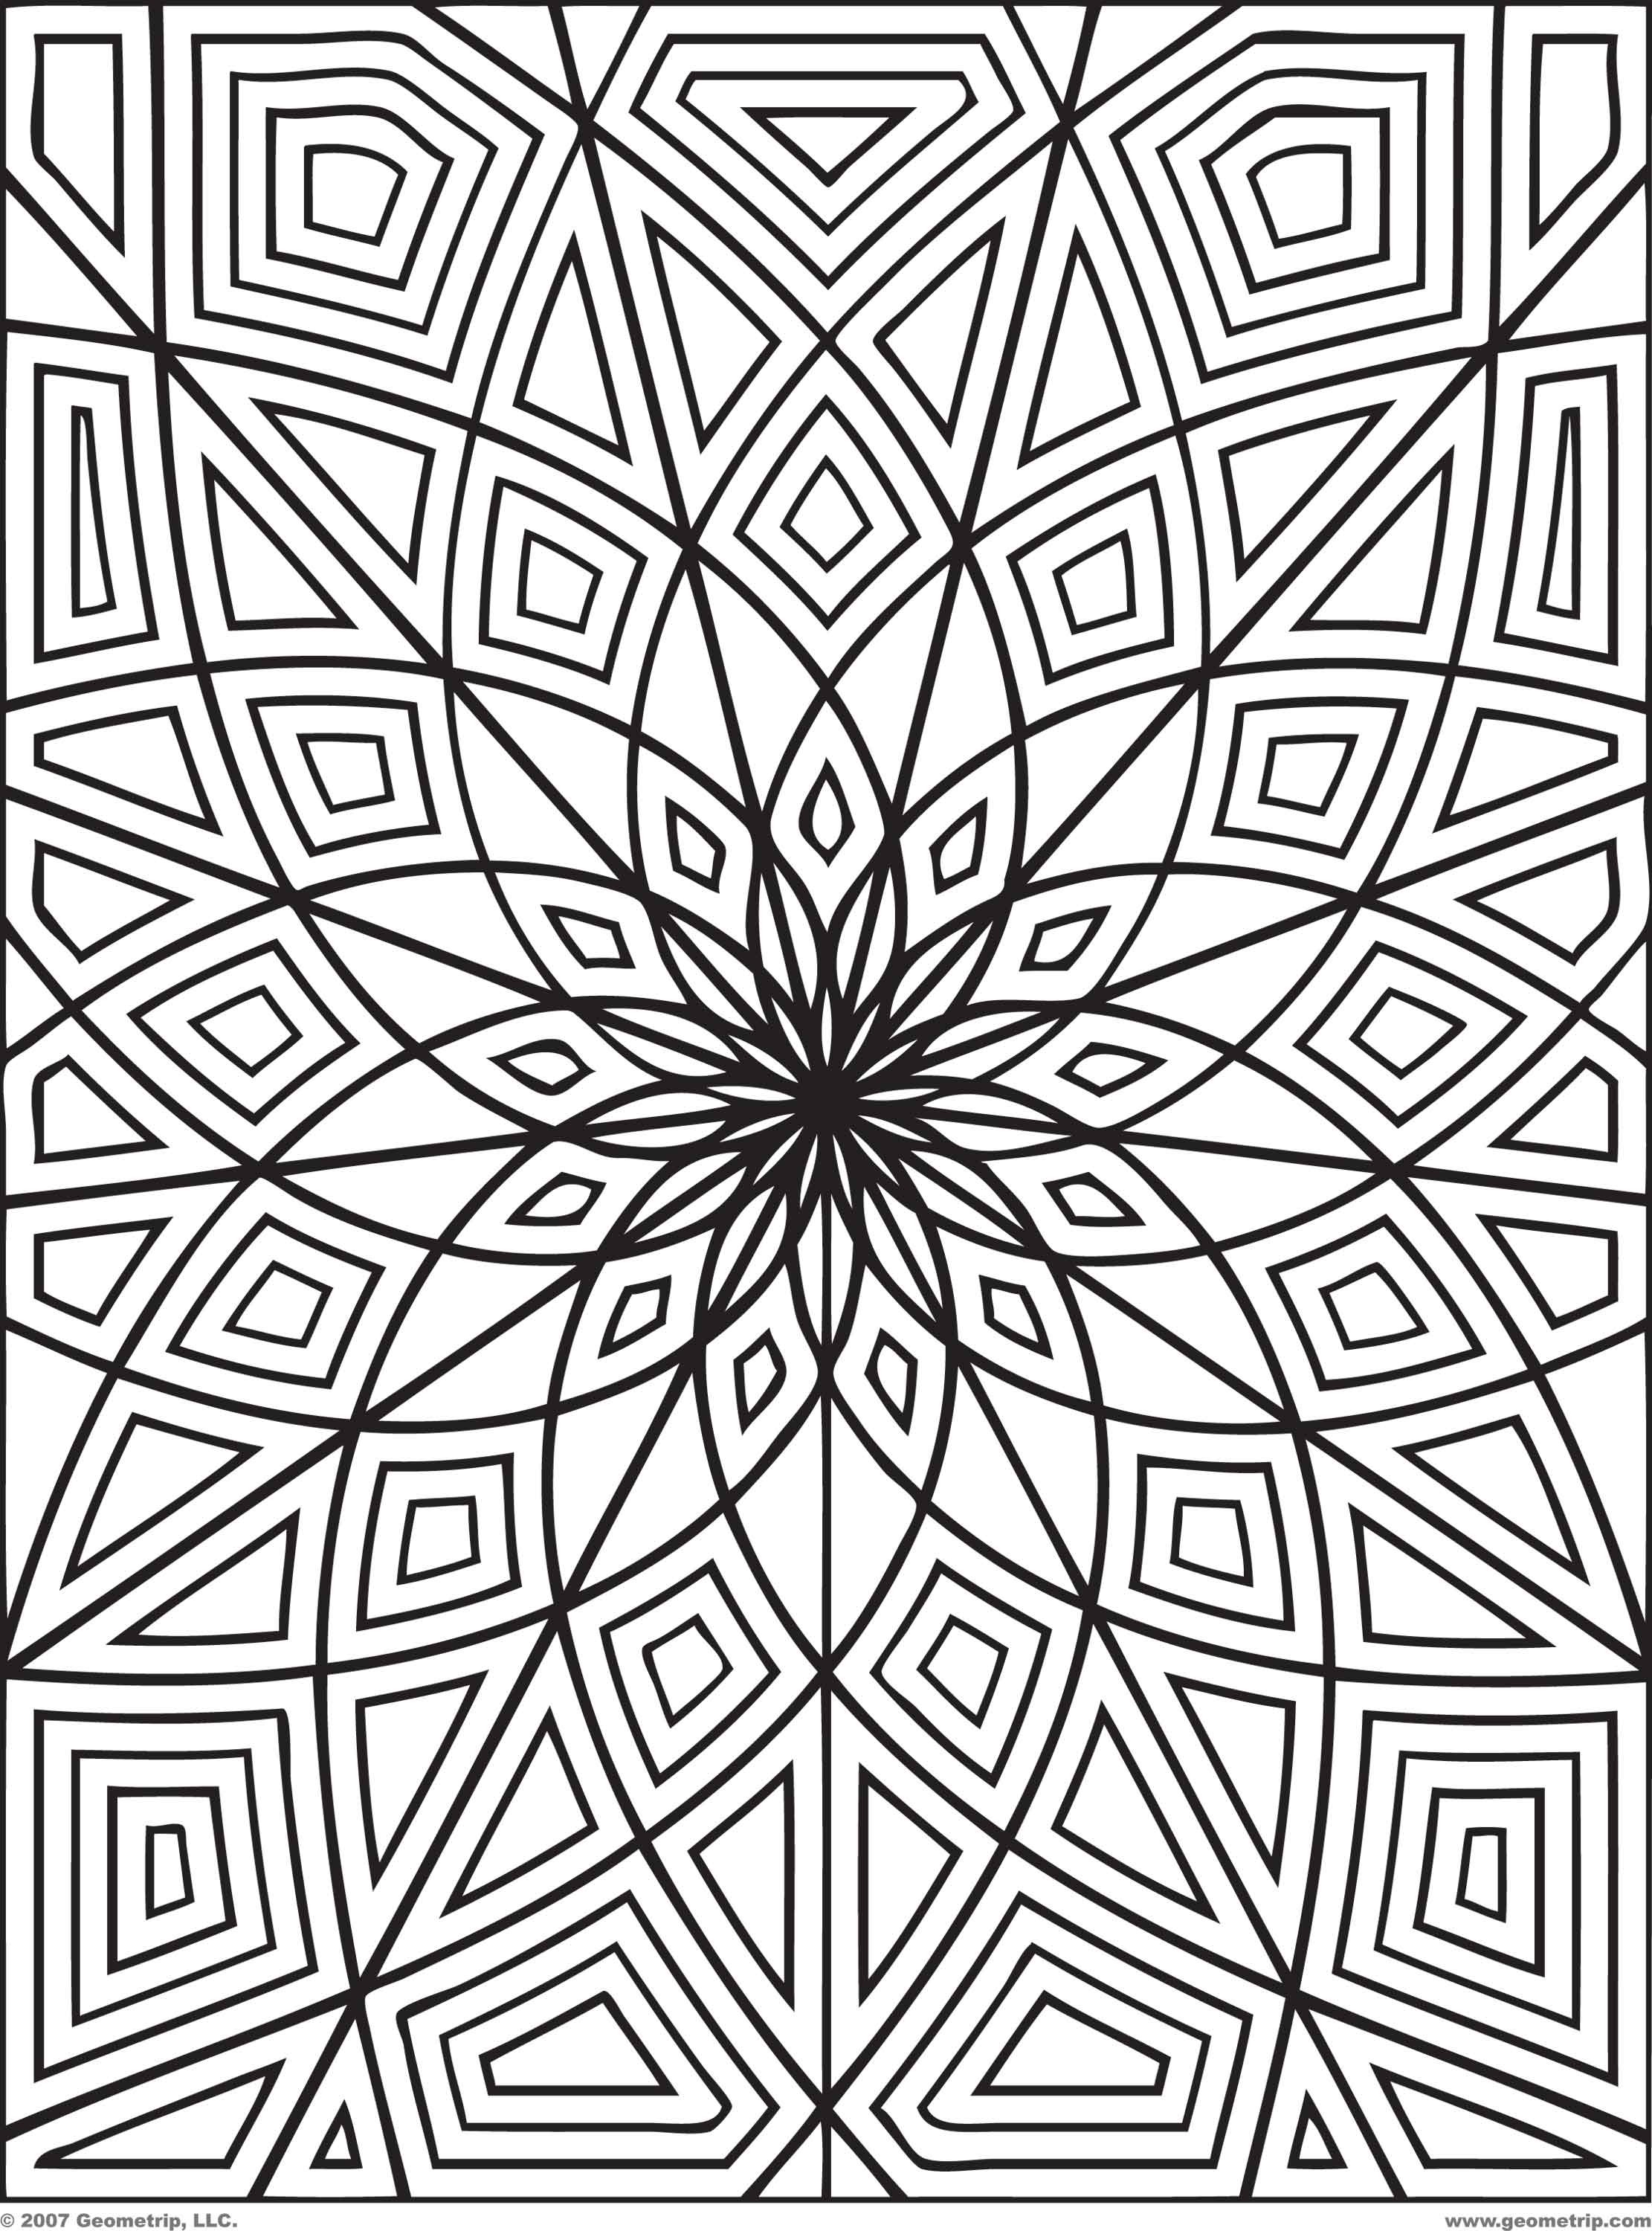 Printable Coloring Pages For Adults Patterns At Getdrawings | Free Download